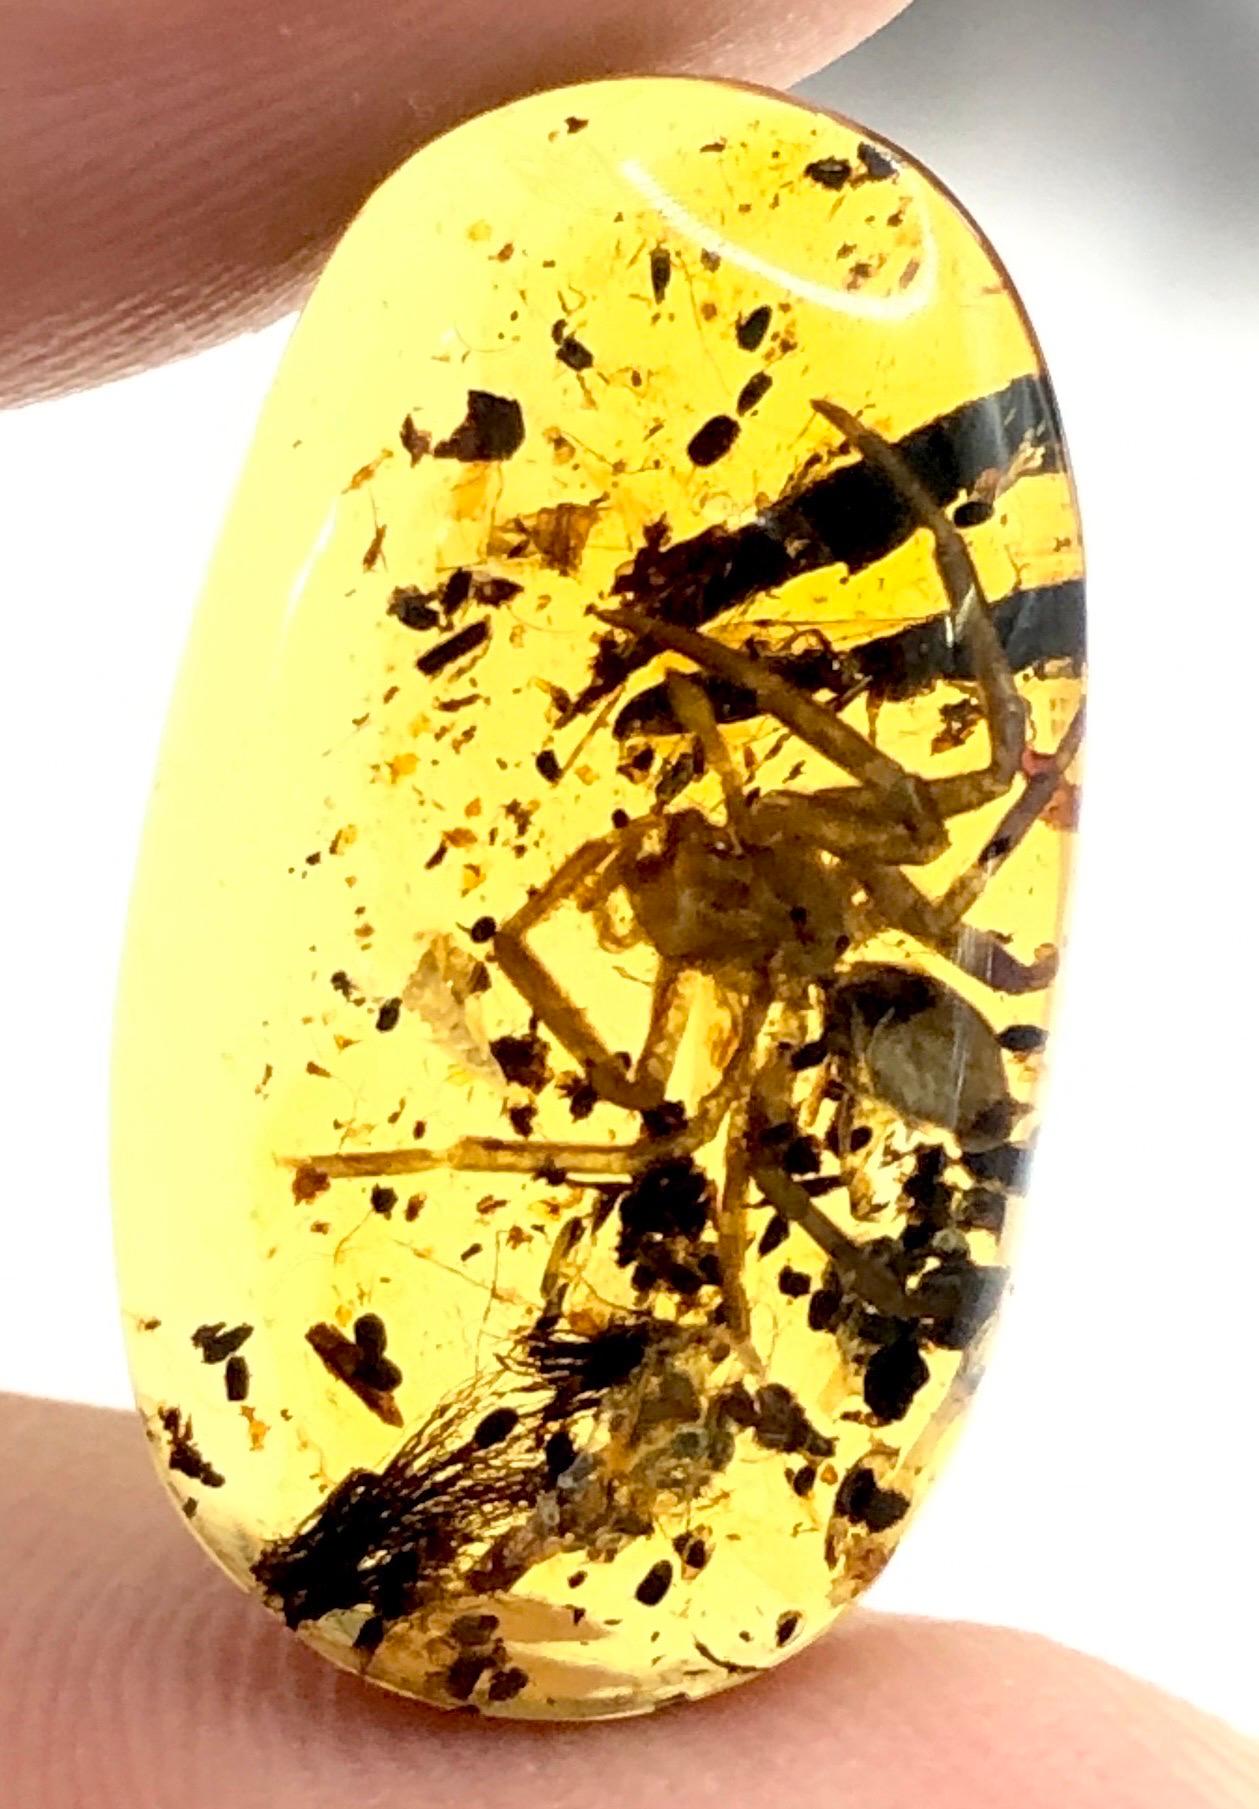 Introducing a remarkable find: Burmese amber housing an ancient secret. Encased within its golden depths, a perfectly preserved spider rests, suspended in time for millions of years. This natural masterpiece offers an unparalleled glimpse into